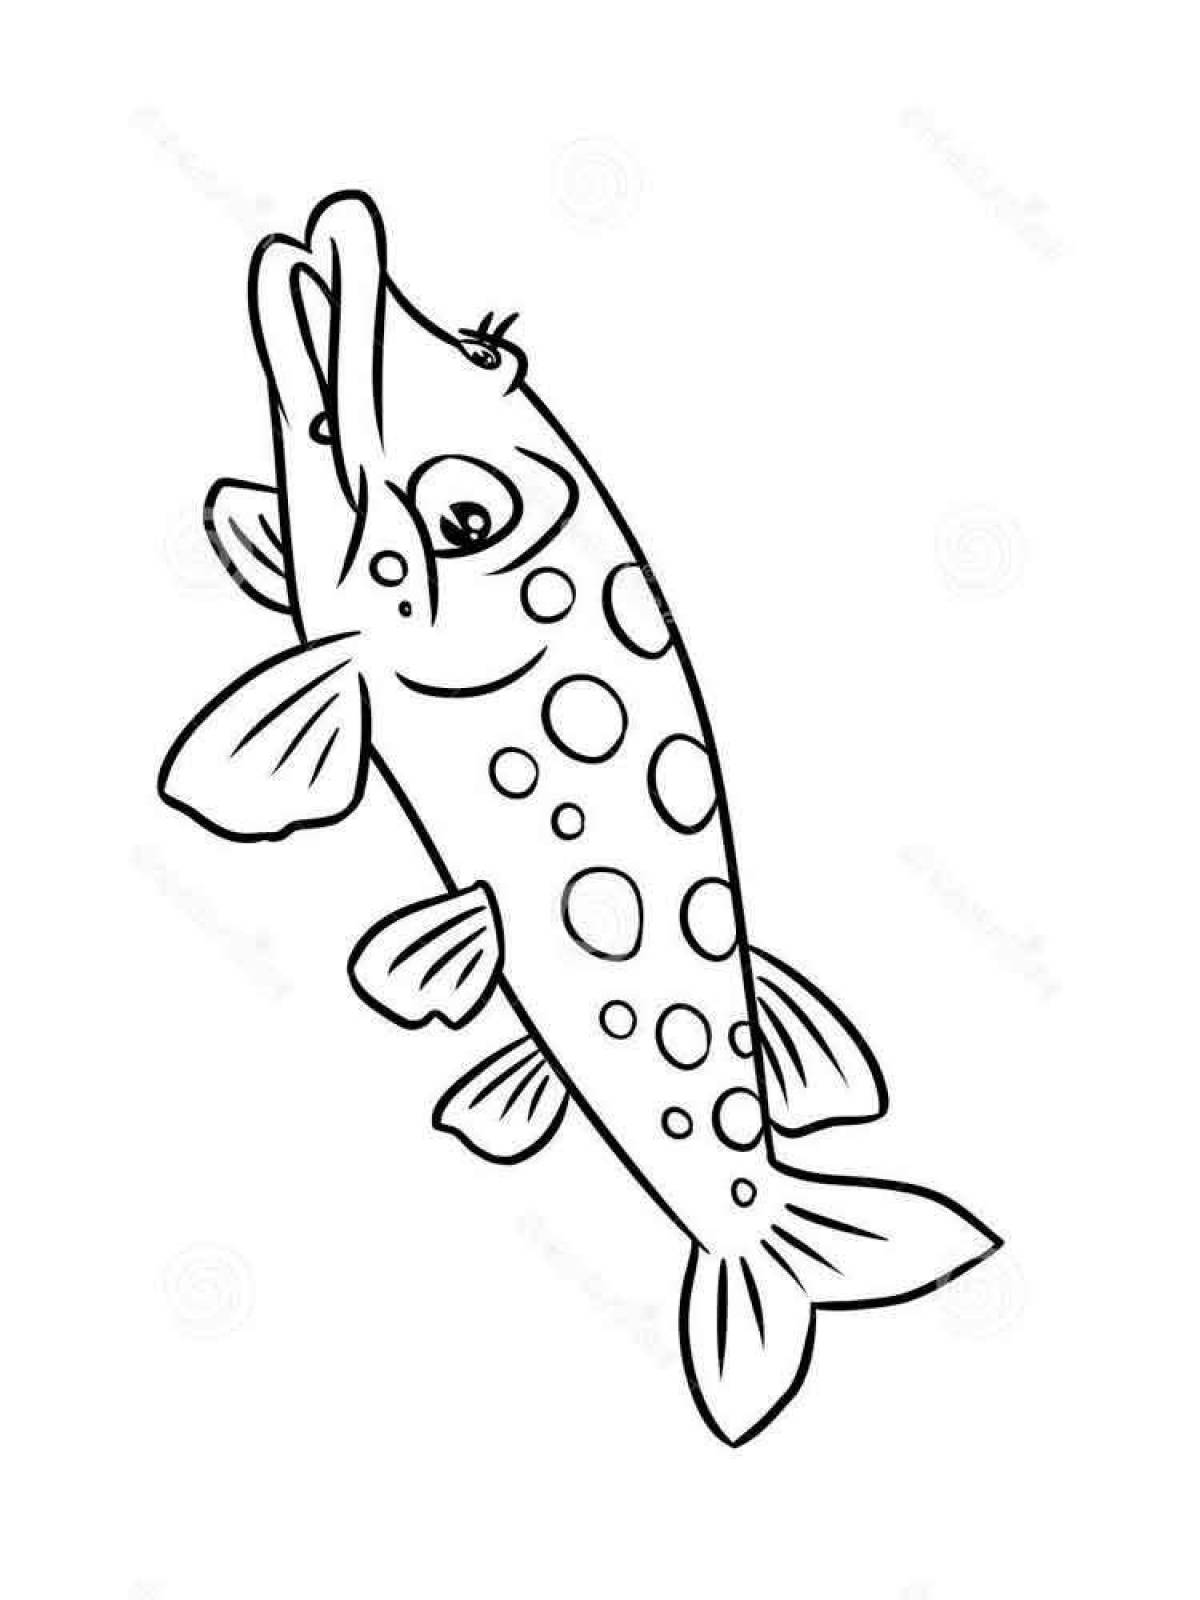 Playful pike coloring page for toddlers